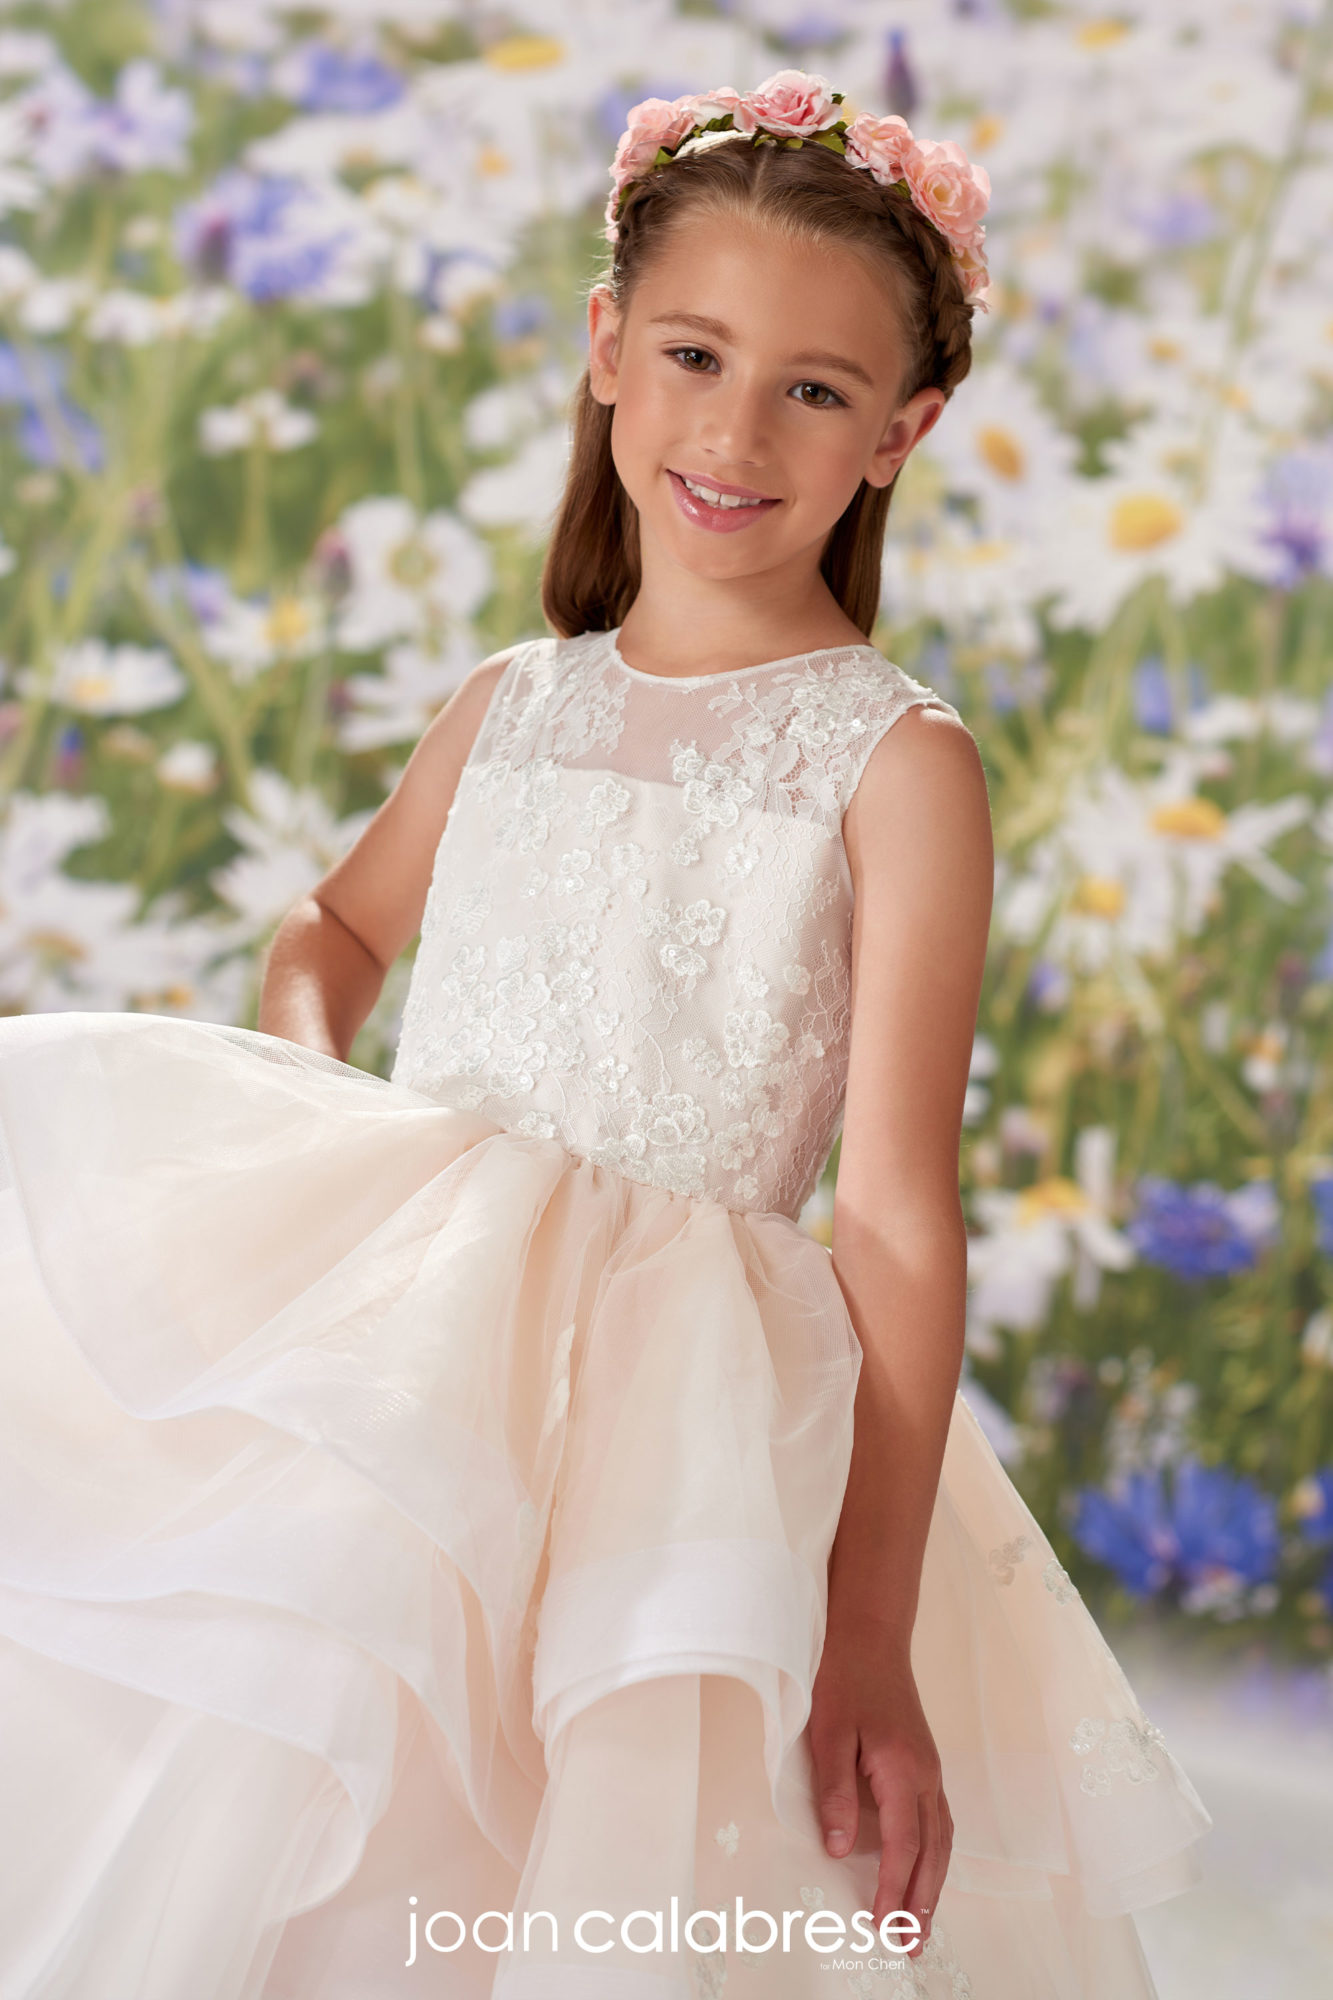 Joan Calabrese Flower Girl Dress Collection | Bridal Reflections